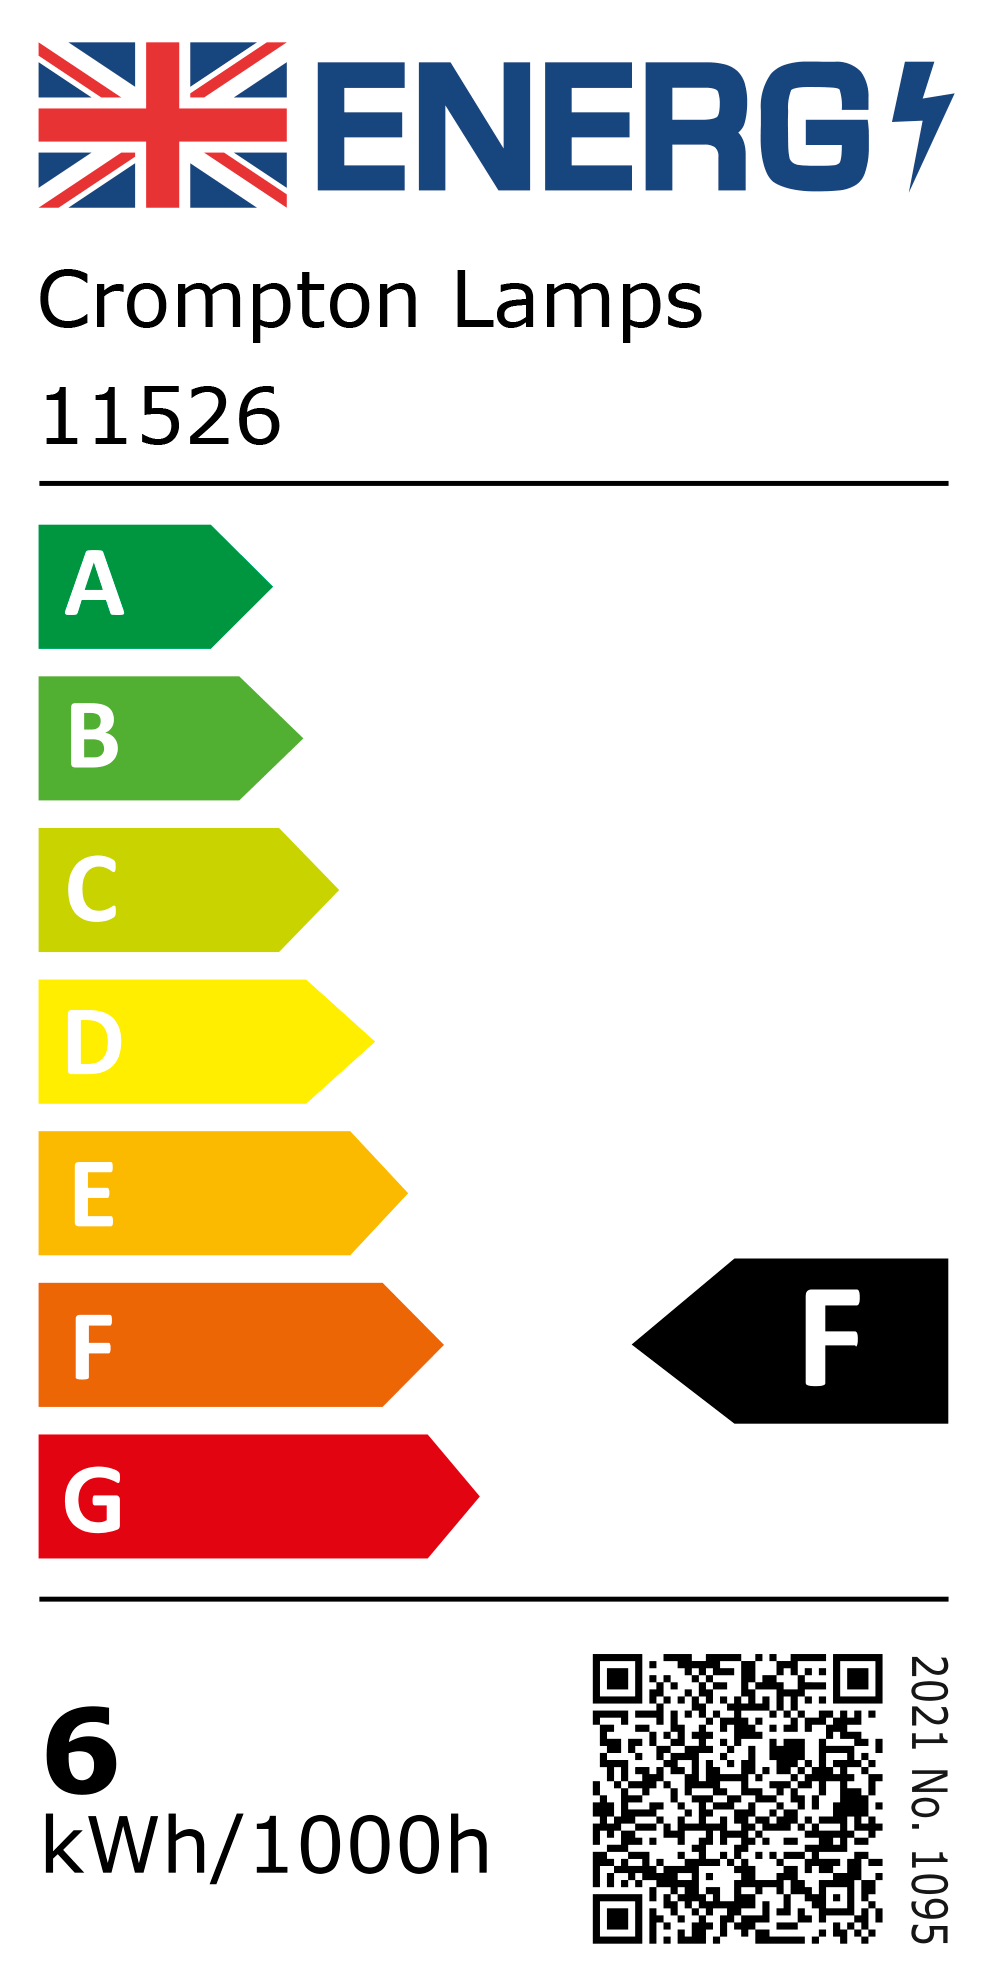 New 2021 Energy Rating Label: Stock Code 11526